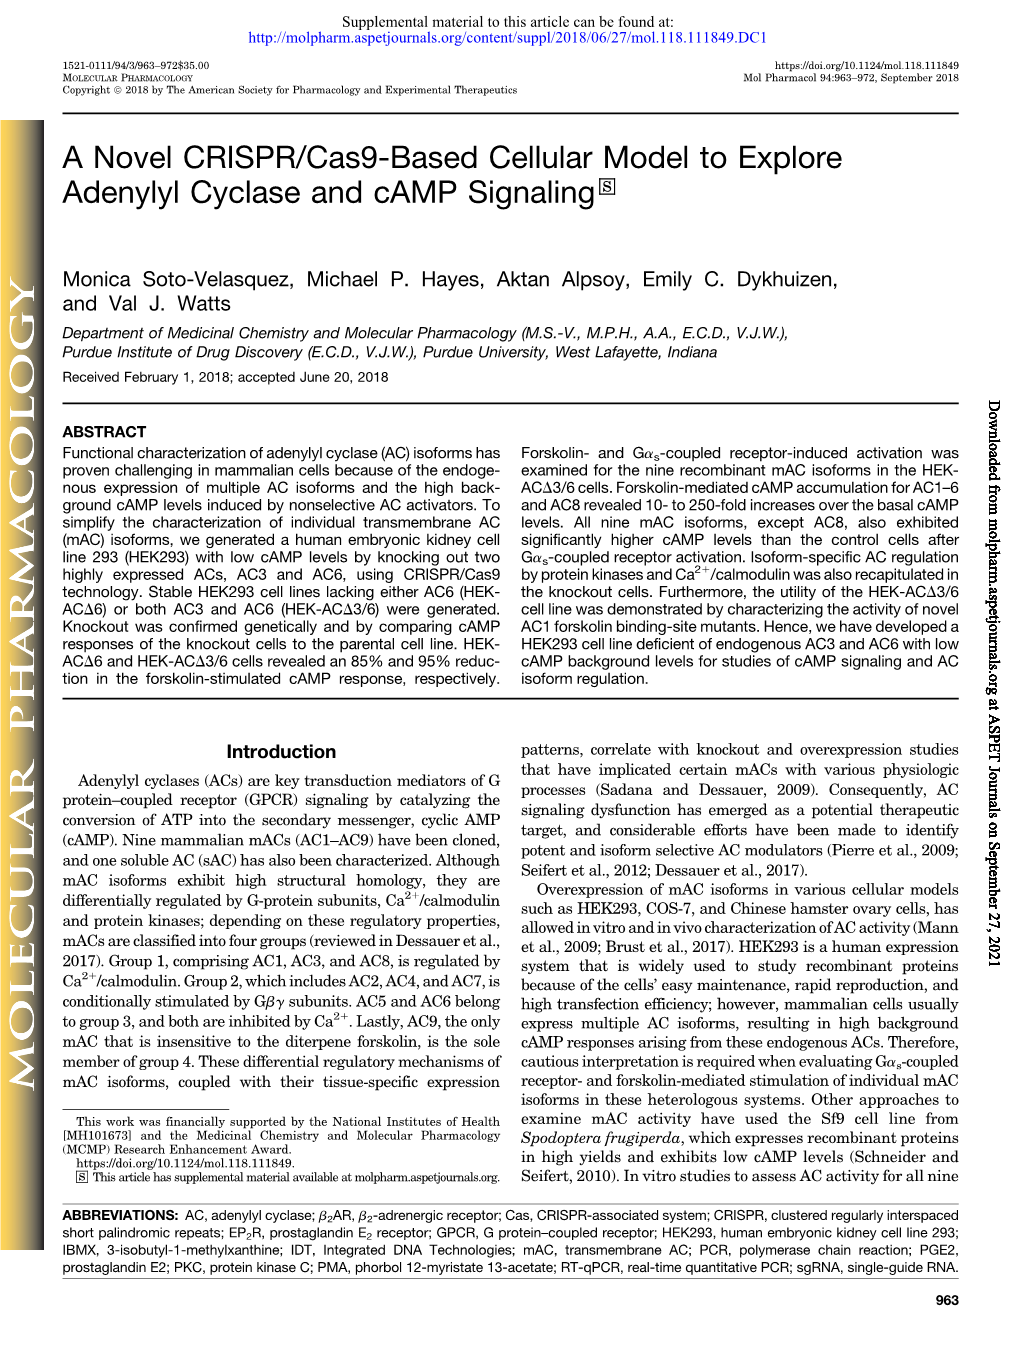 A Novel CRISPR/Cas9-Based Cellular Model to Explore Adenylyl Cyclase and Camp Signaling S